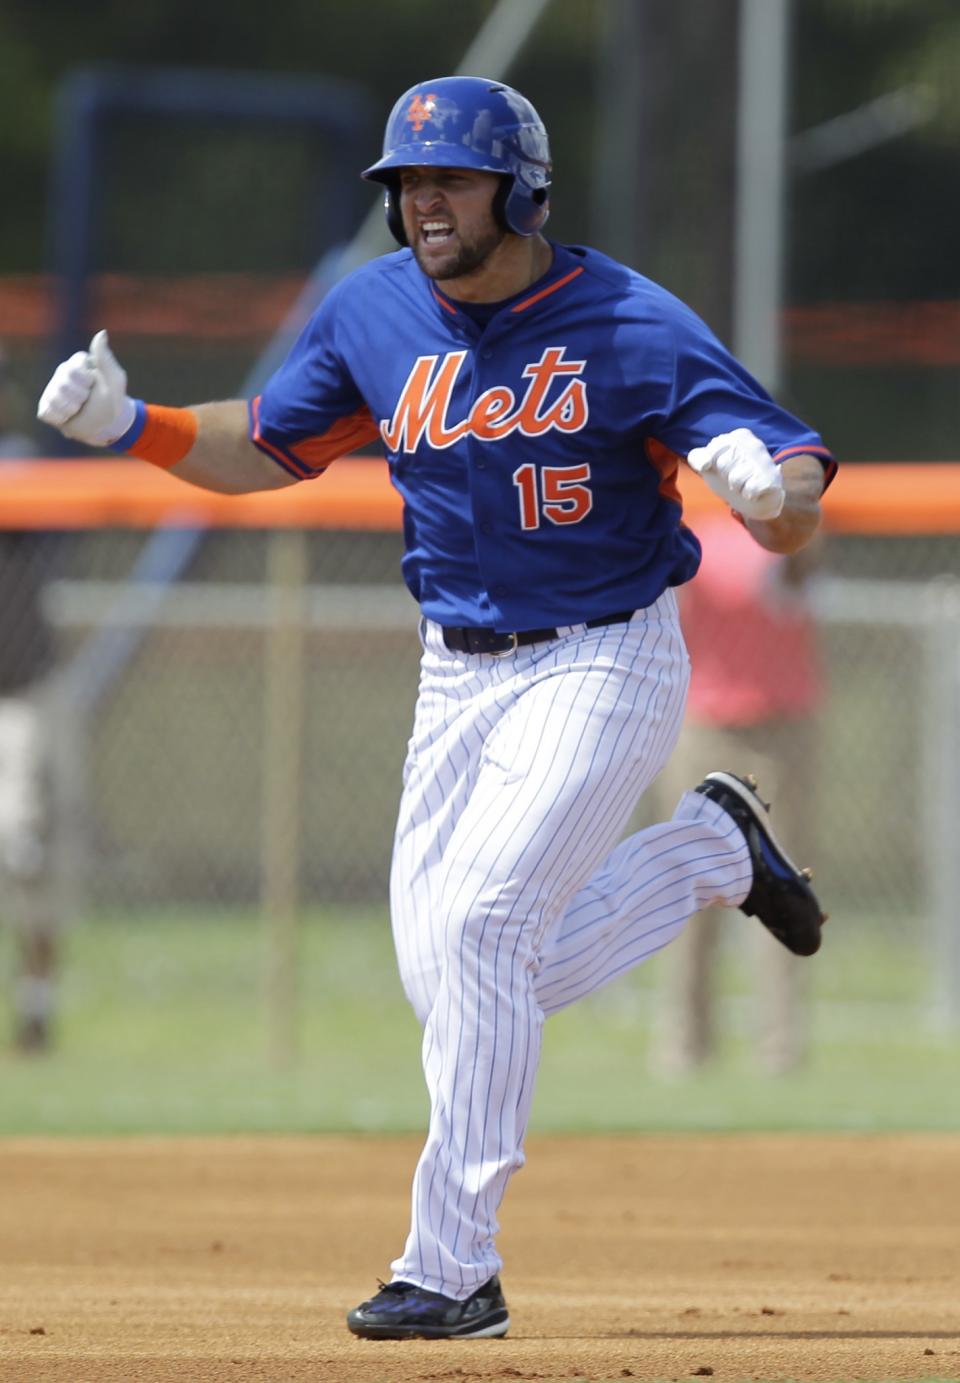 <p>Tim Tebow reacts after hitting a solo home run in his first at bat during the first inning of his first instructional league baseball game for the New York Mets against the St. Louis Cardinals instructional club Wednesday, Sept. 28, 2016, in Port St. Lucie, Fla. (AP Photo/Luis M. Alvarez) </p>